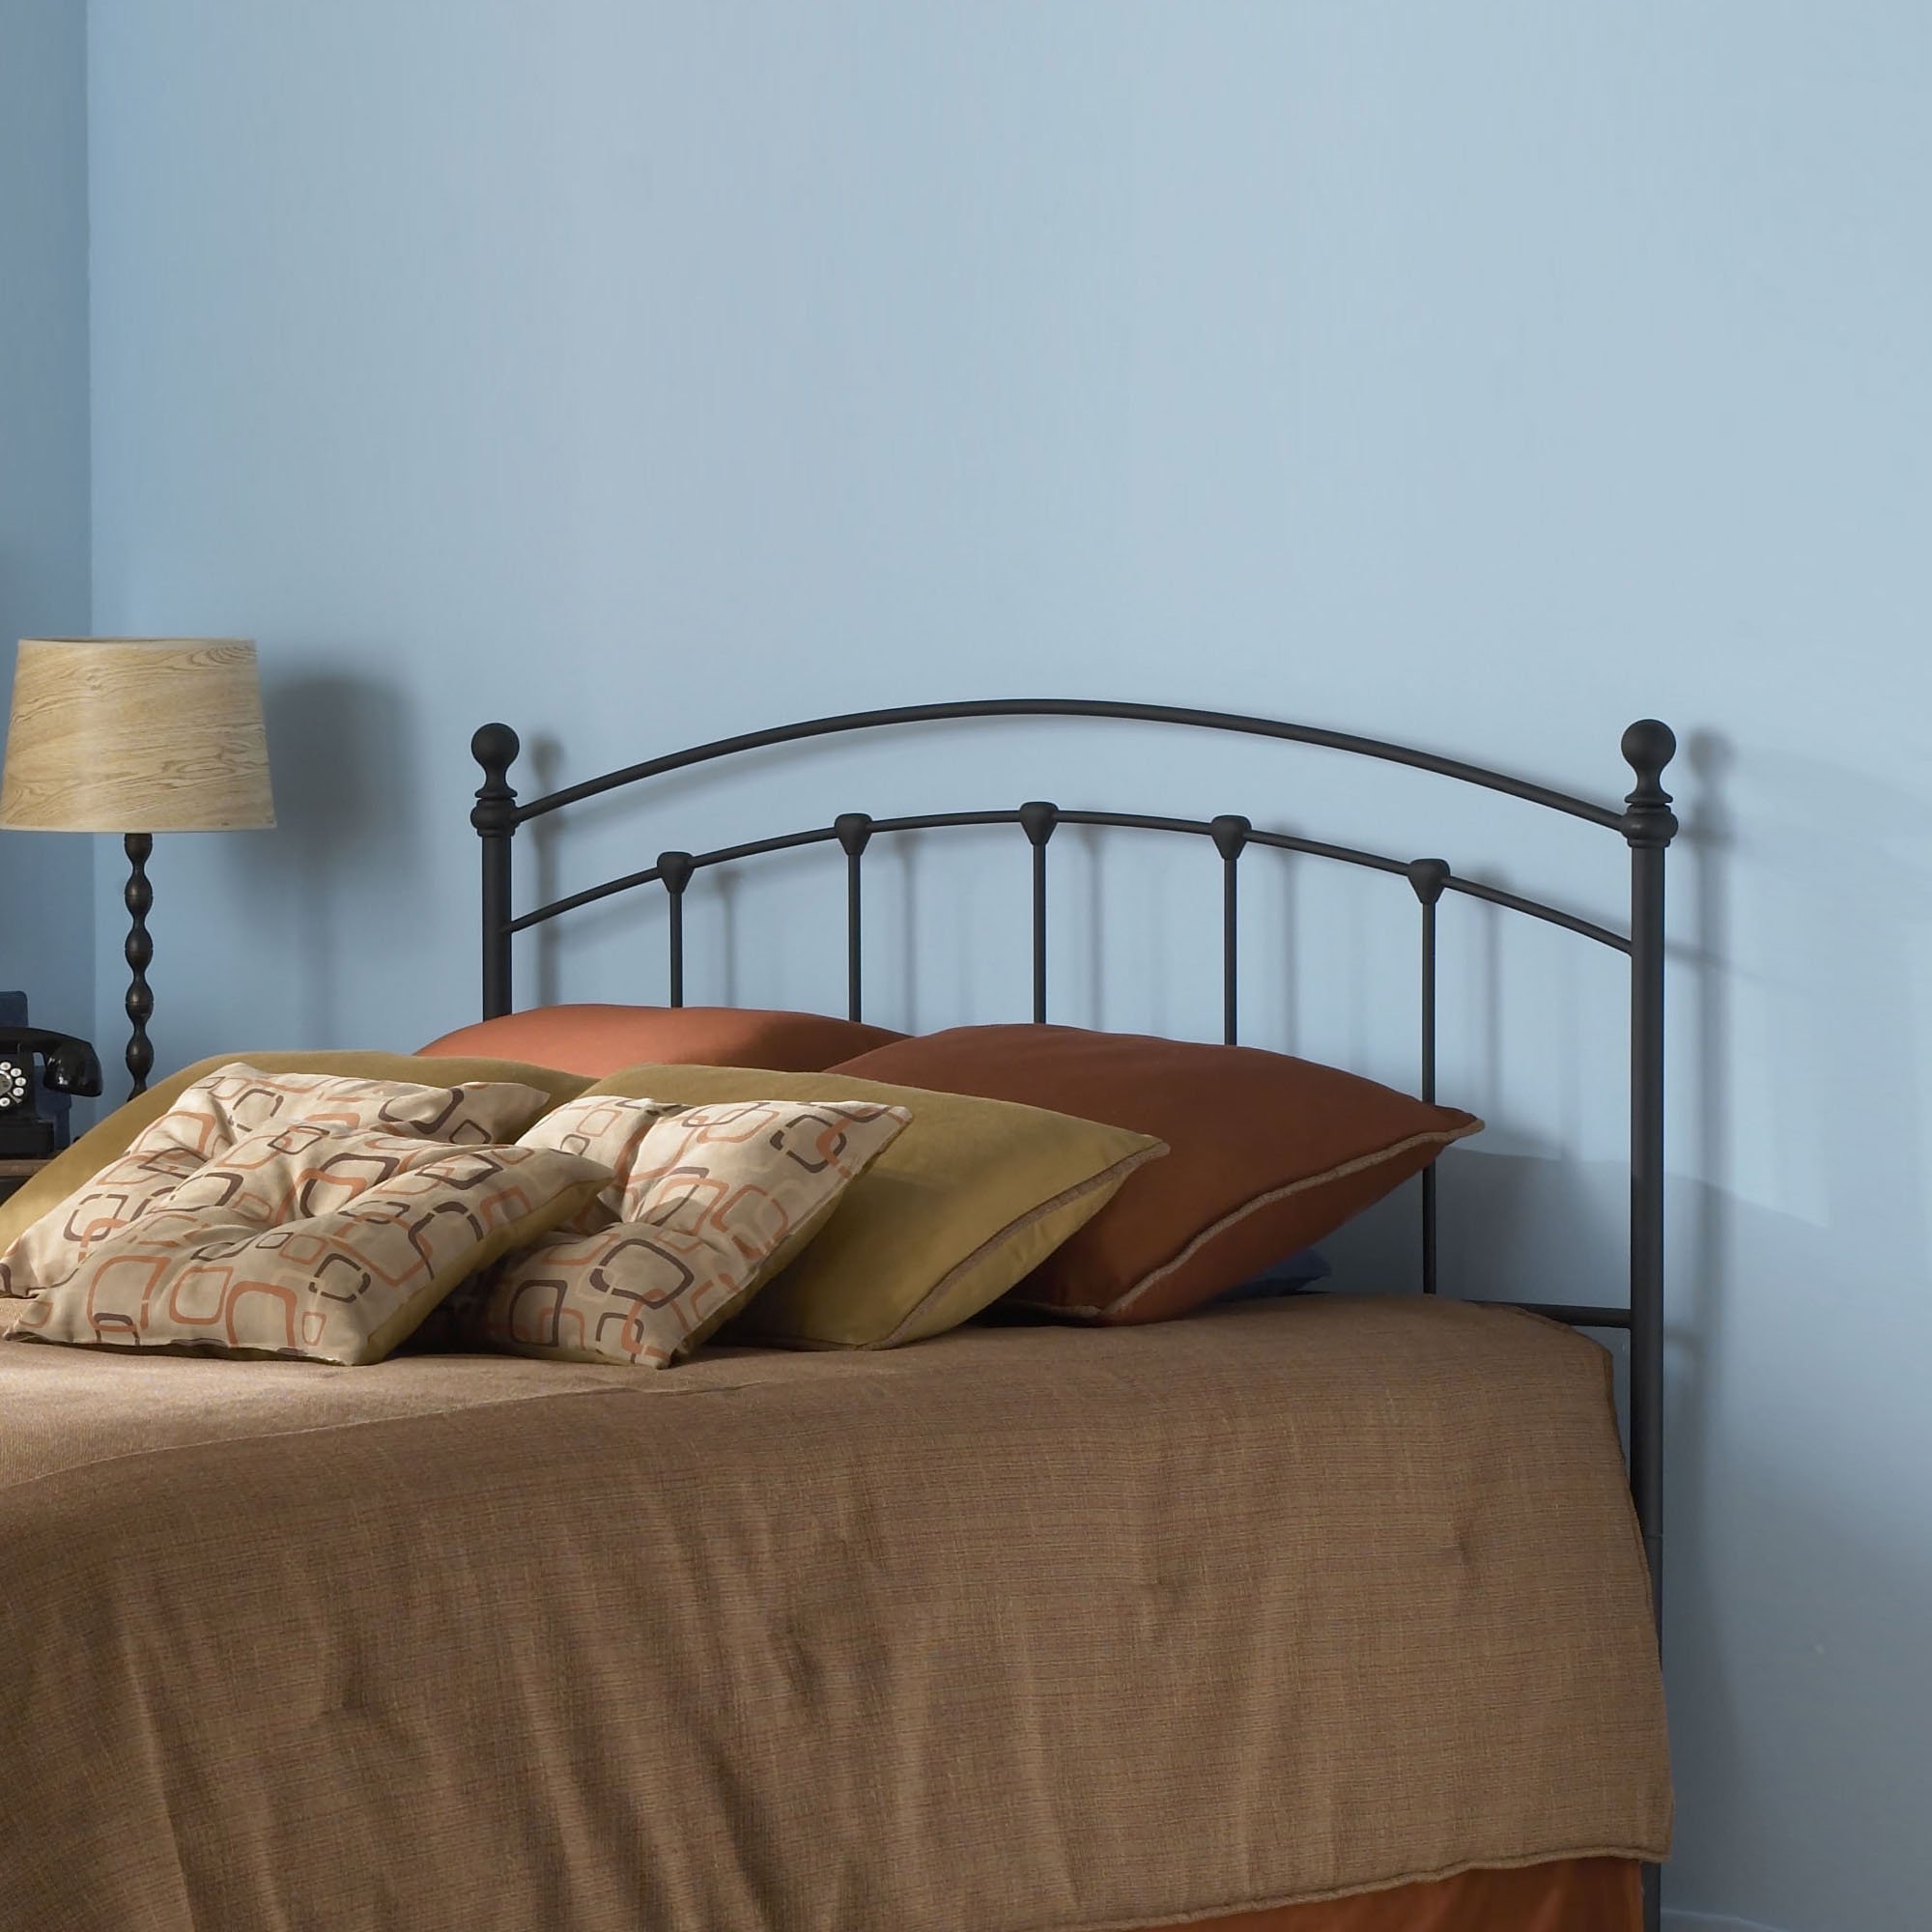 Sanford metal headboard thinking about family guest room with honeybees